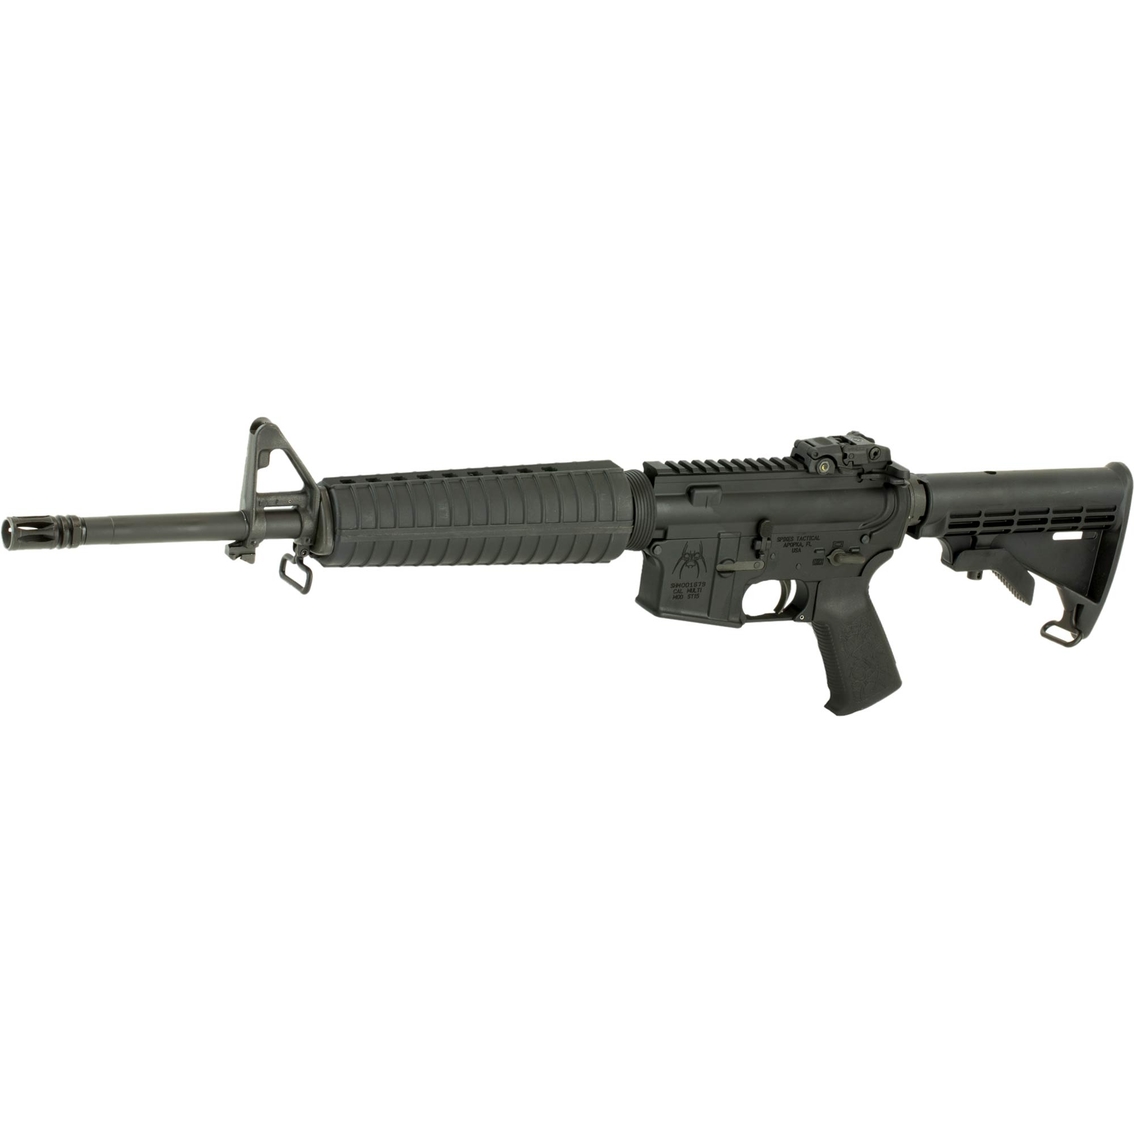 Spike's Tactical ST-15 556NATO 16 in. Barrel No Mag Rifle Black - Image 3 of 3